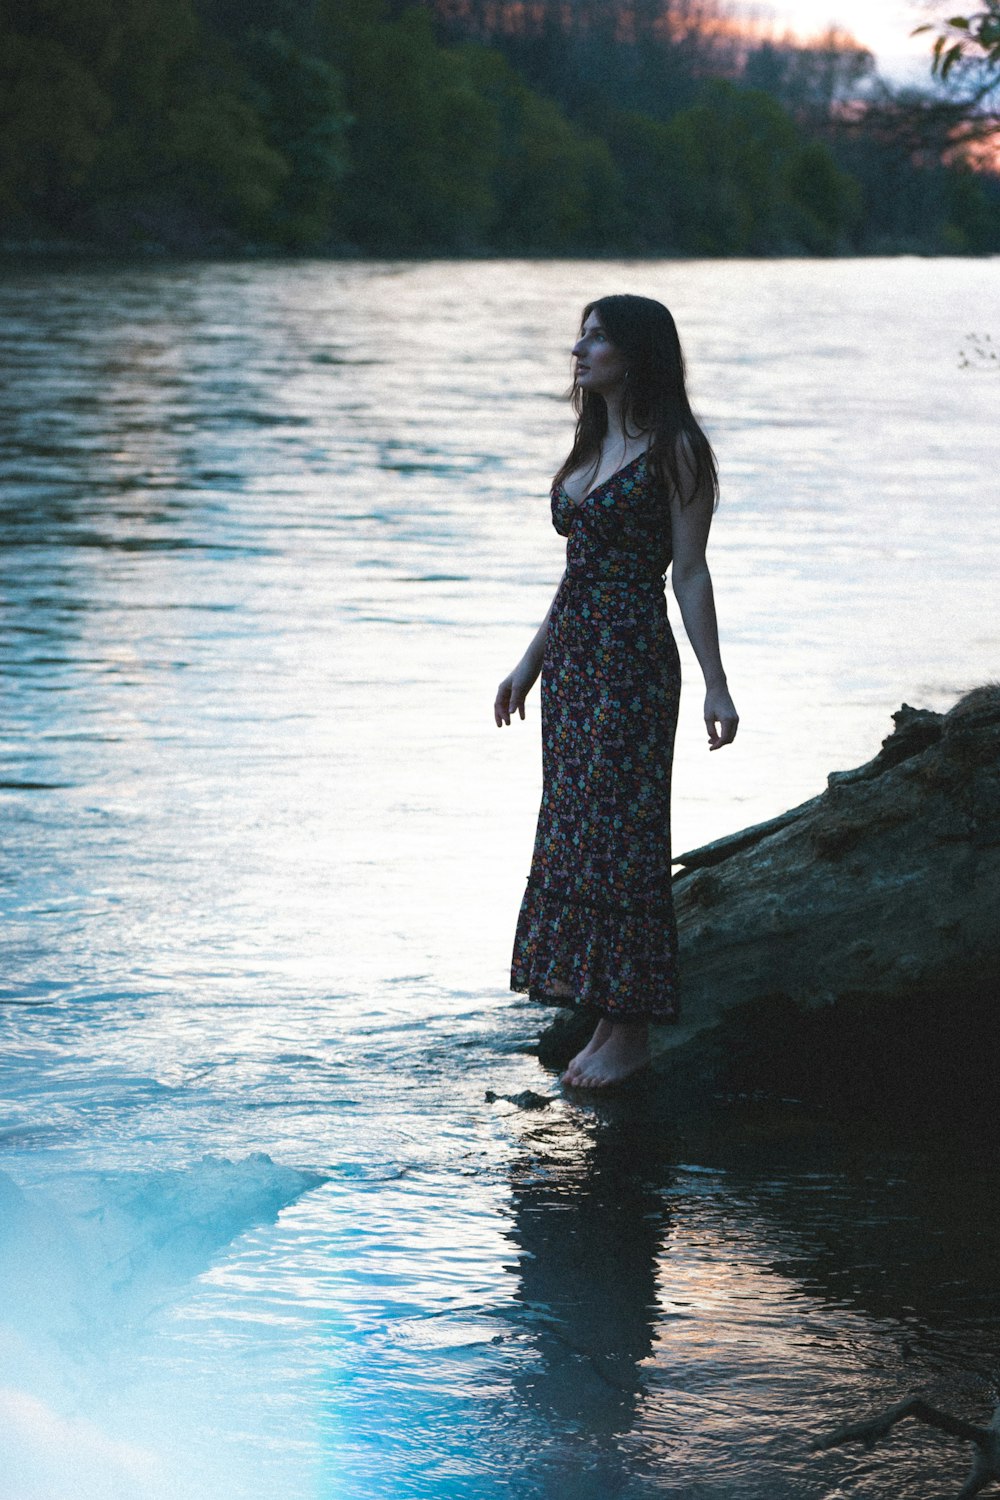 woman in black dress standing on rock near body of water during daytime